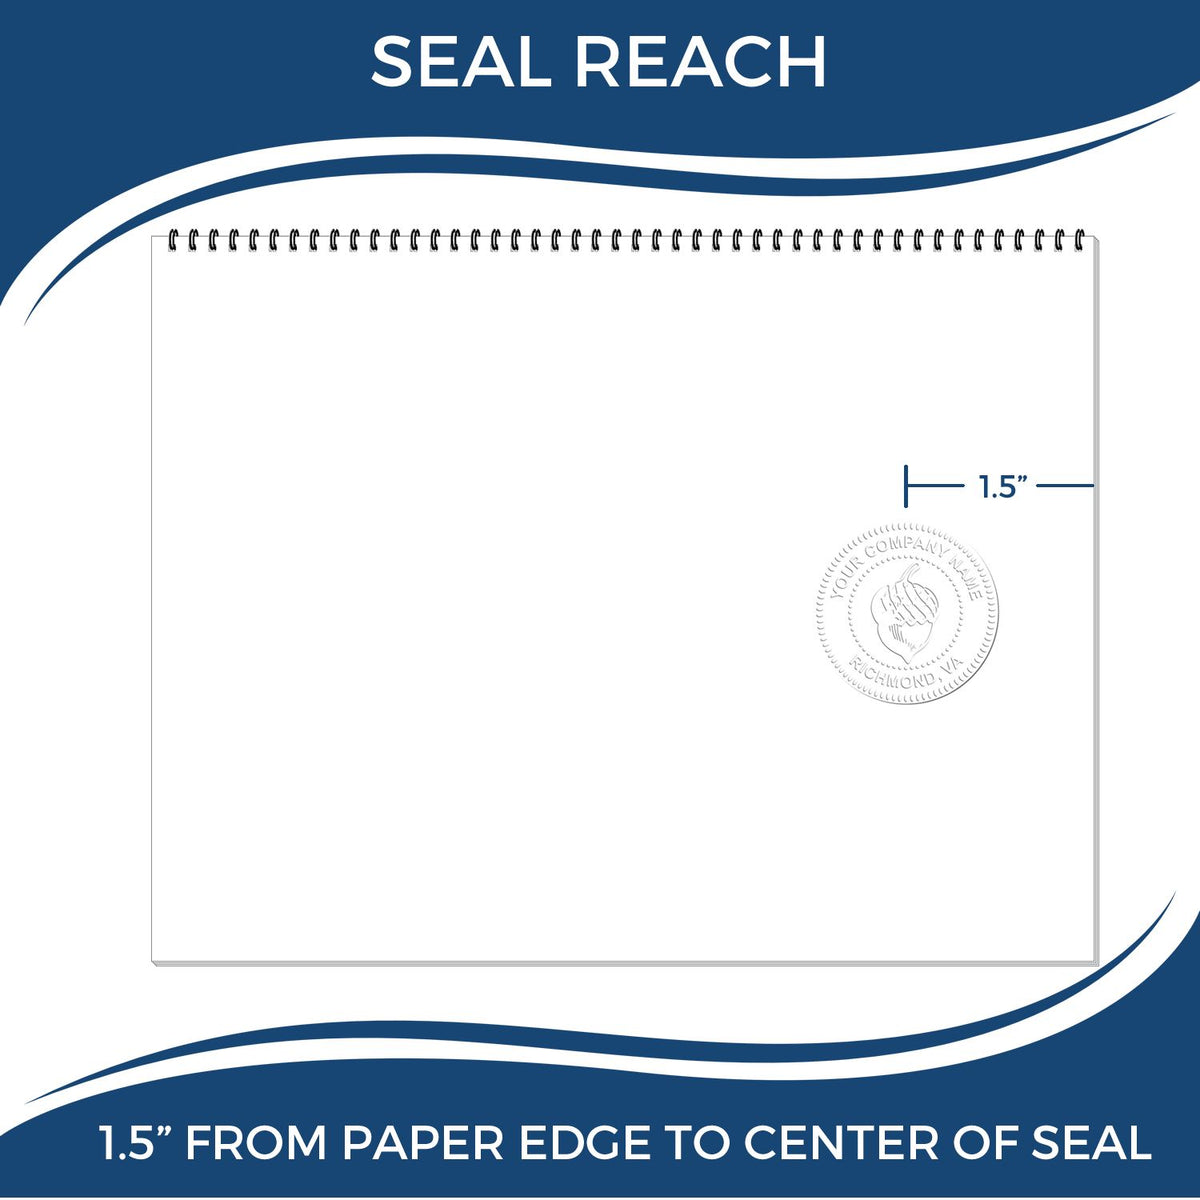 An infographic showing the seal reach which is represented by a ruler and a miniature seal image of the State of Michigan Architectural Seal Embosser